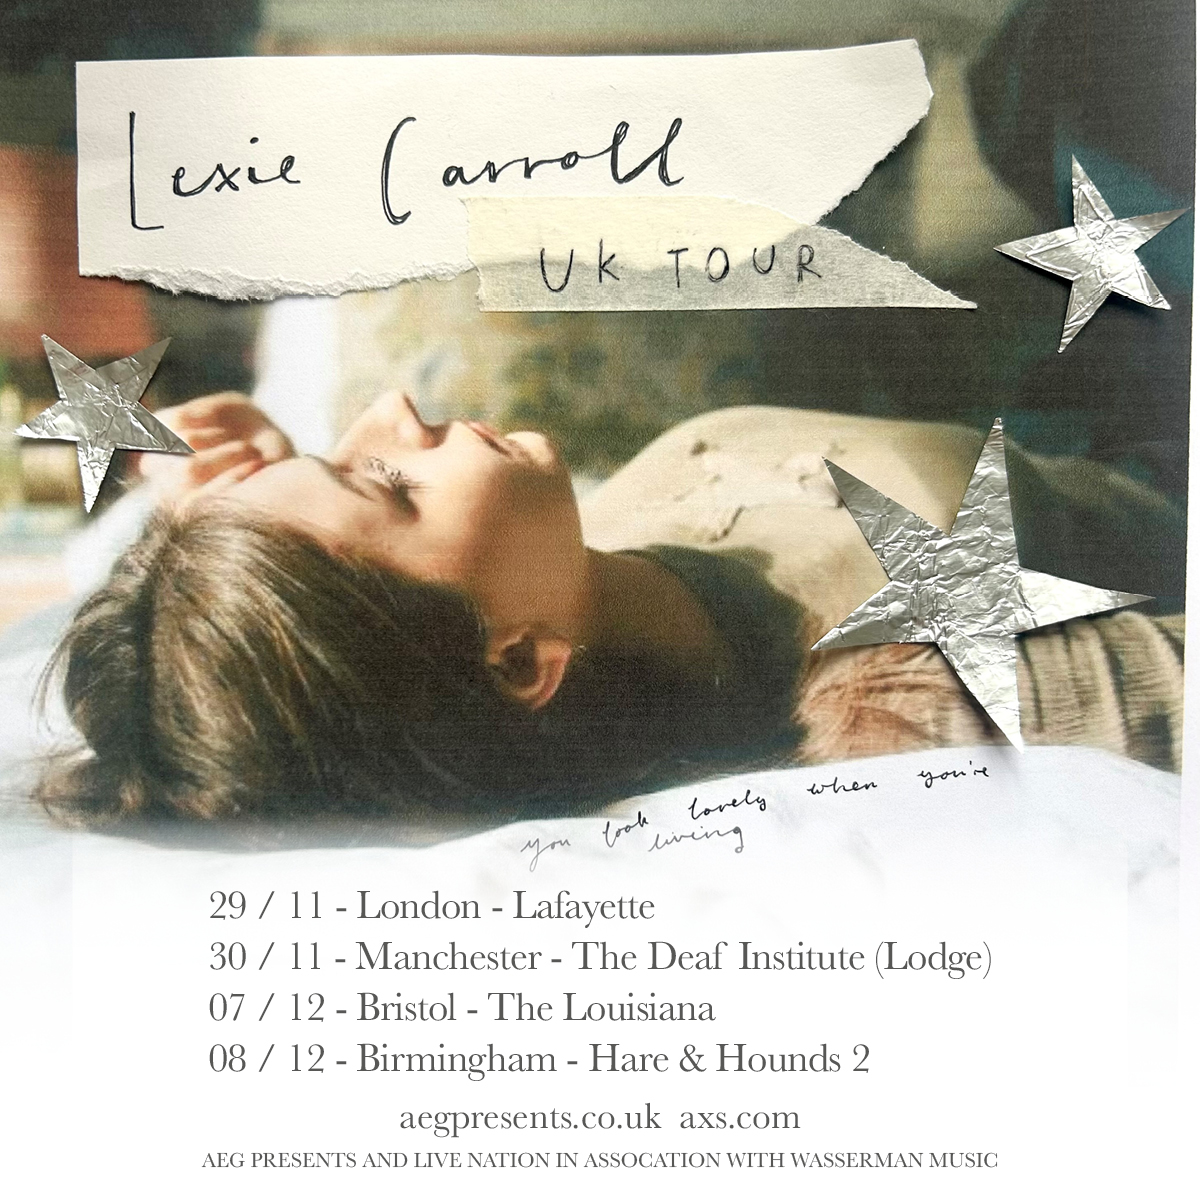 #AXSNEW Rising indie pop star @lexiecarroll_ will head out on a four date tour this November/December, with stops in London, Manchester, Bristol and Birmingham! ⏰ Tickets are on sale Friday at 10am 🎫 w.axs.com/7FMT50RtcJw